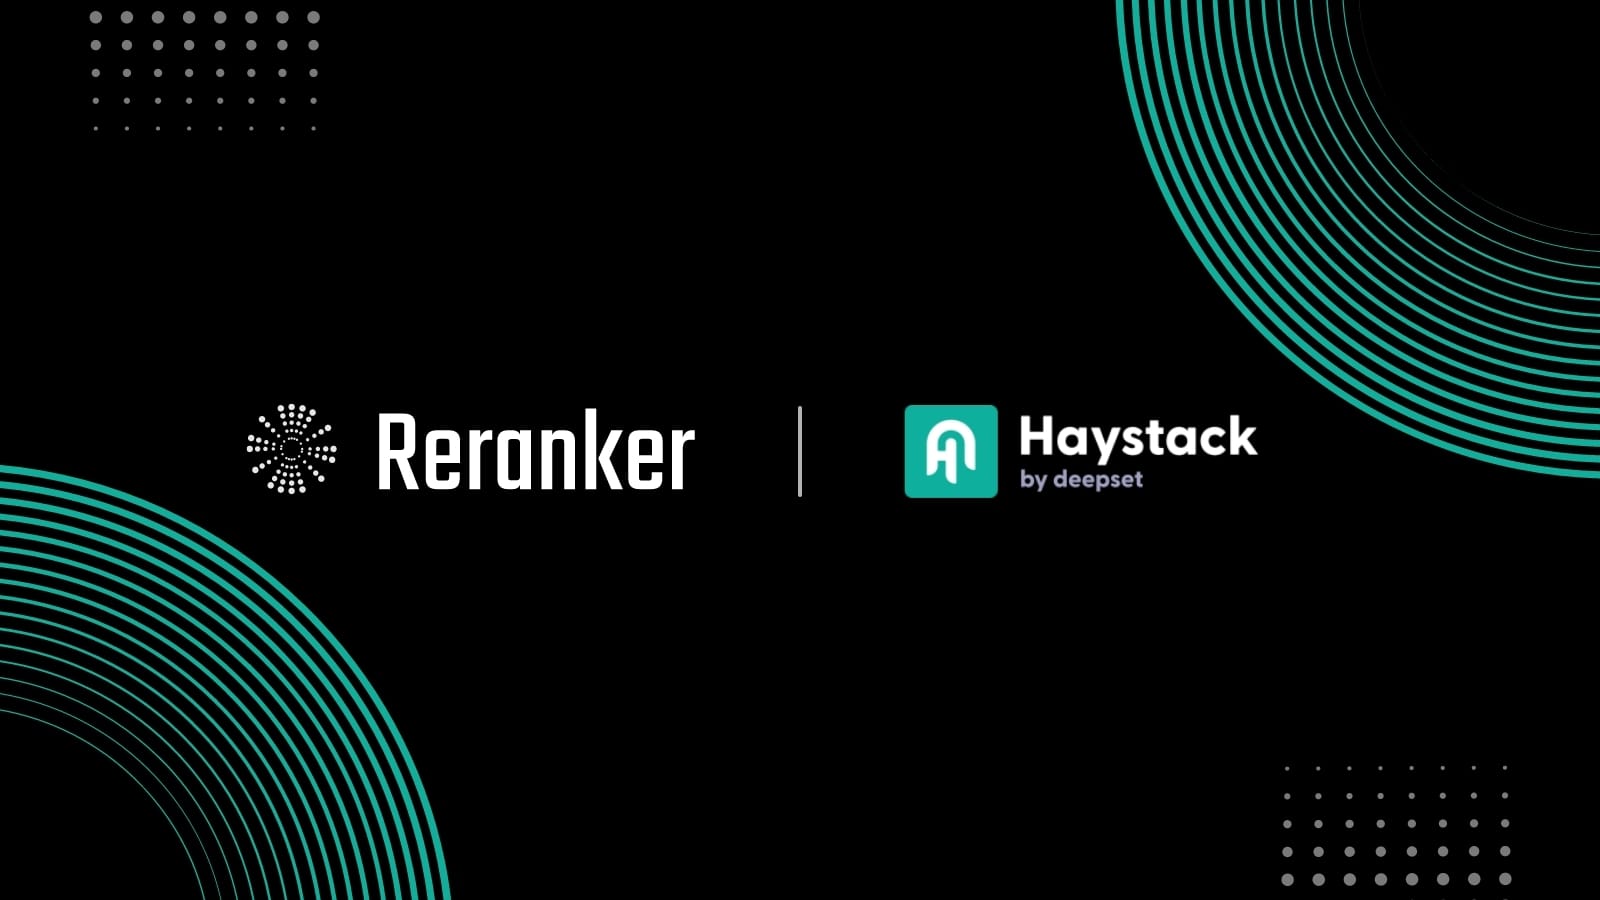 Graphic with "Reranker" and "Haystack by deepset" on a black background with teal decorative elements.